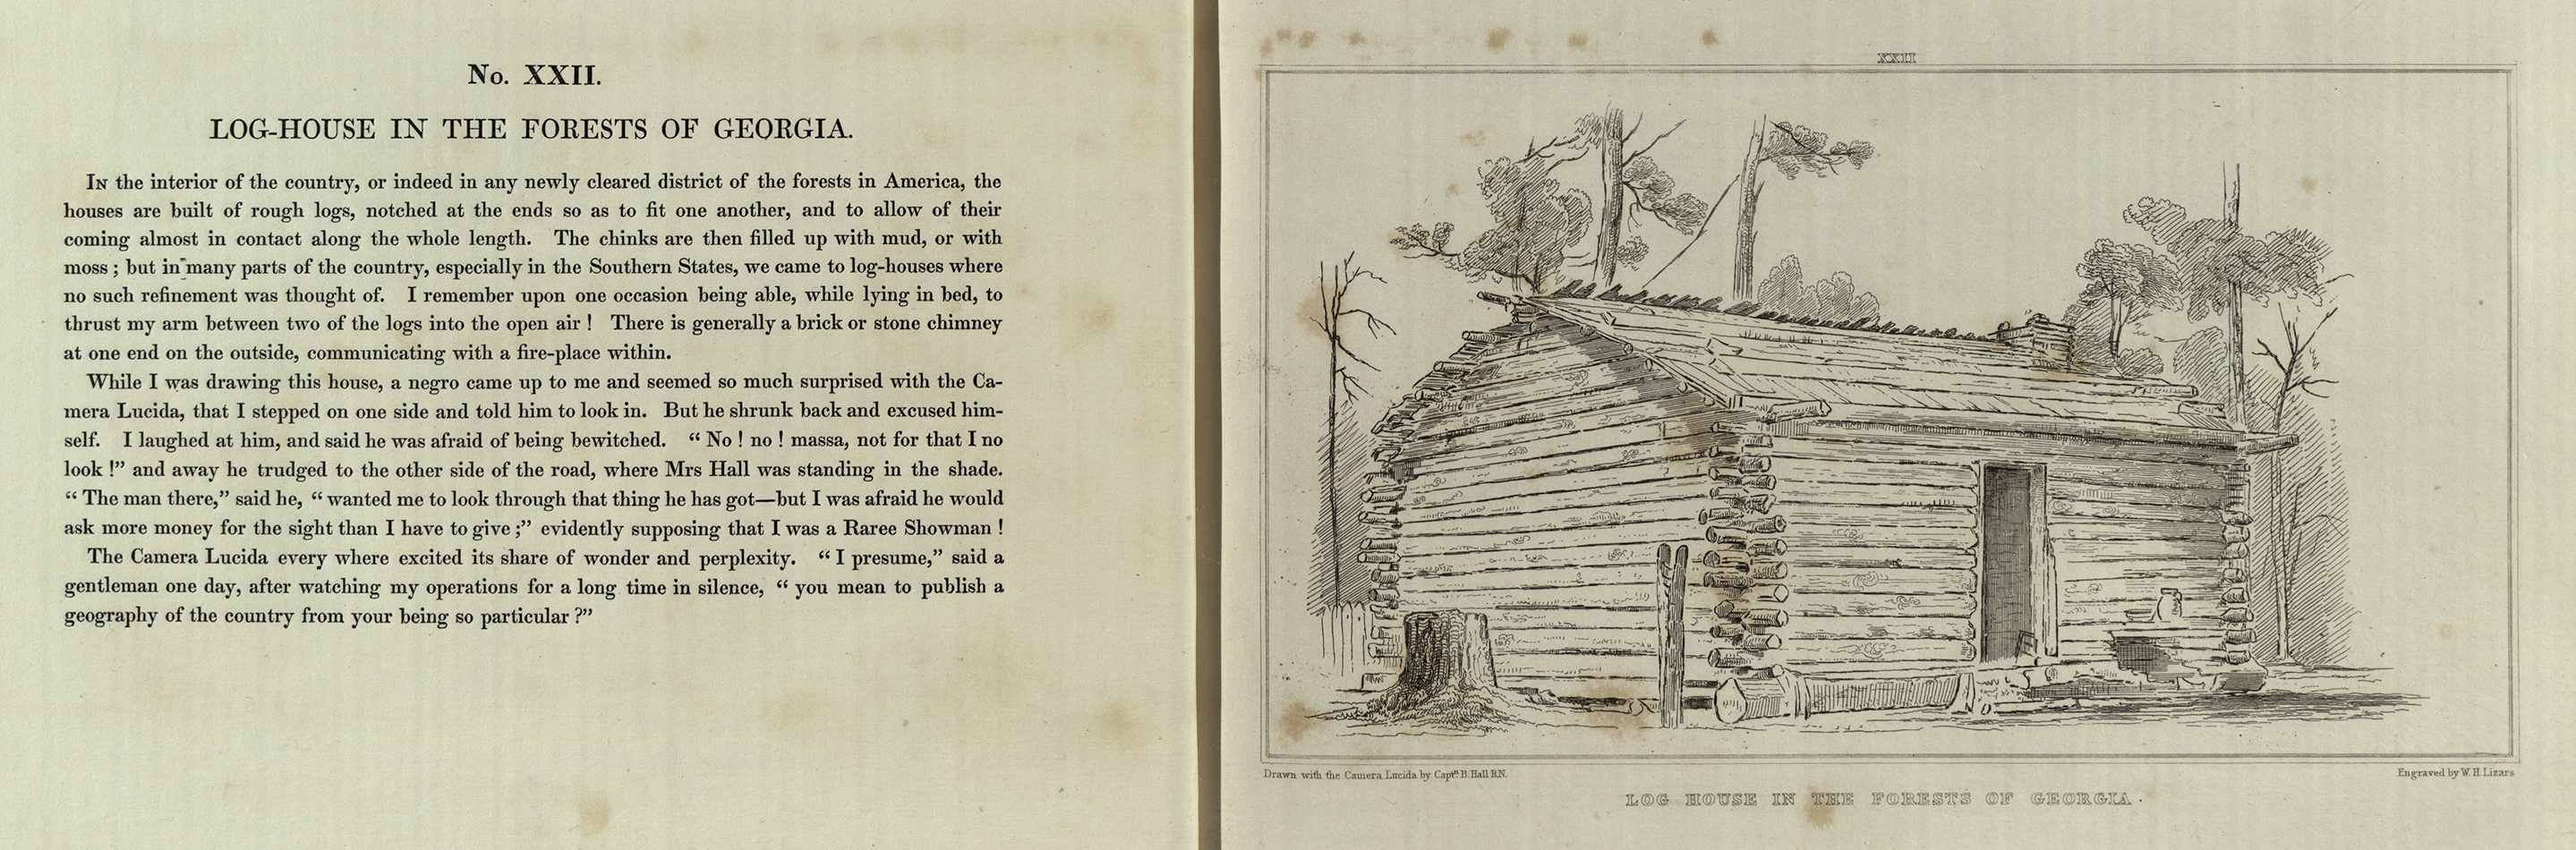 11 Plate XXII - Capt. Hall's far more detailed drawing of a log house in Georgia and rather amusing anecdotes of peoples reactions to his work. [rfF1013.H2]_1